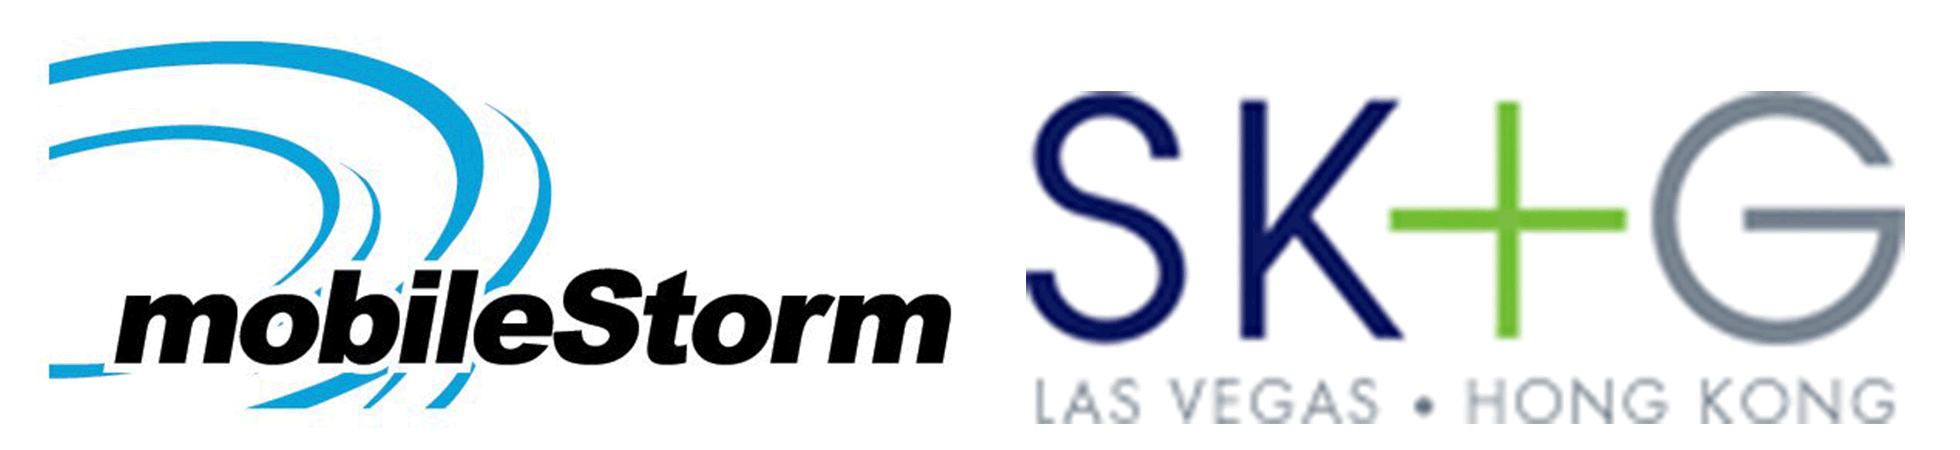 Las Vegas Marketing Agency SK+G Teams Up with mobileStorm Inc. to Provide the Latest Mobile Marketing Solutions to the Casino Industry